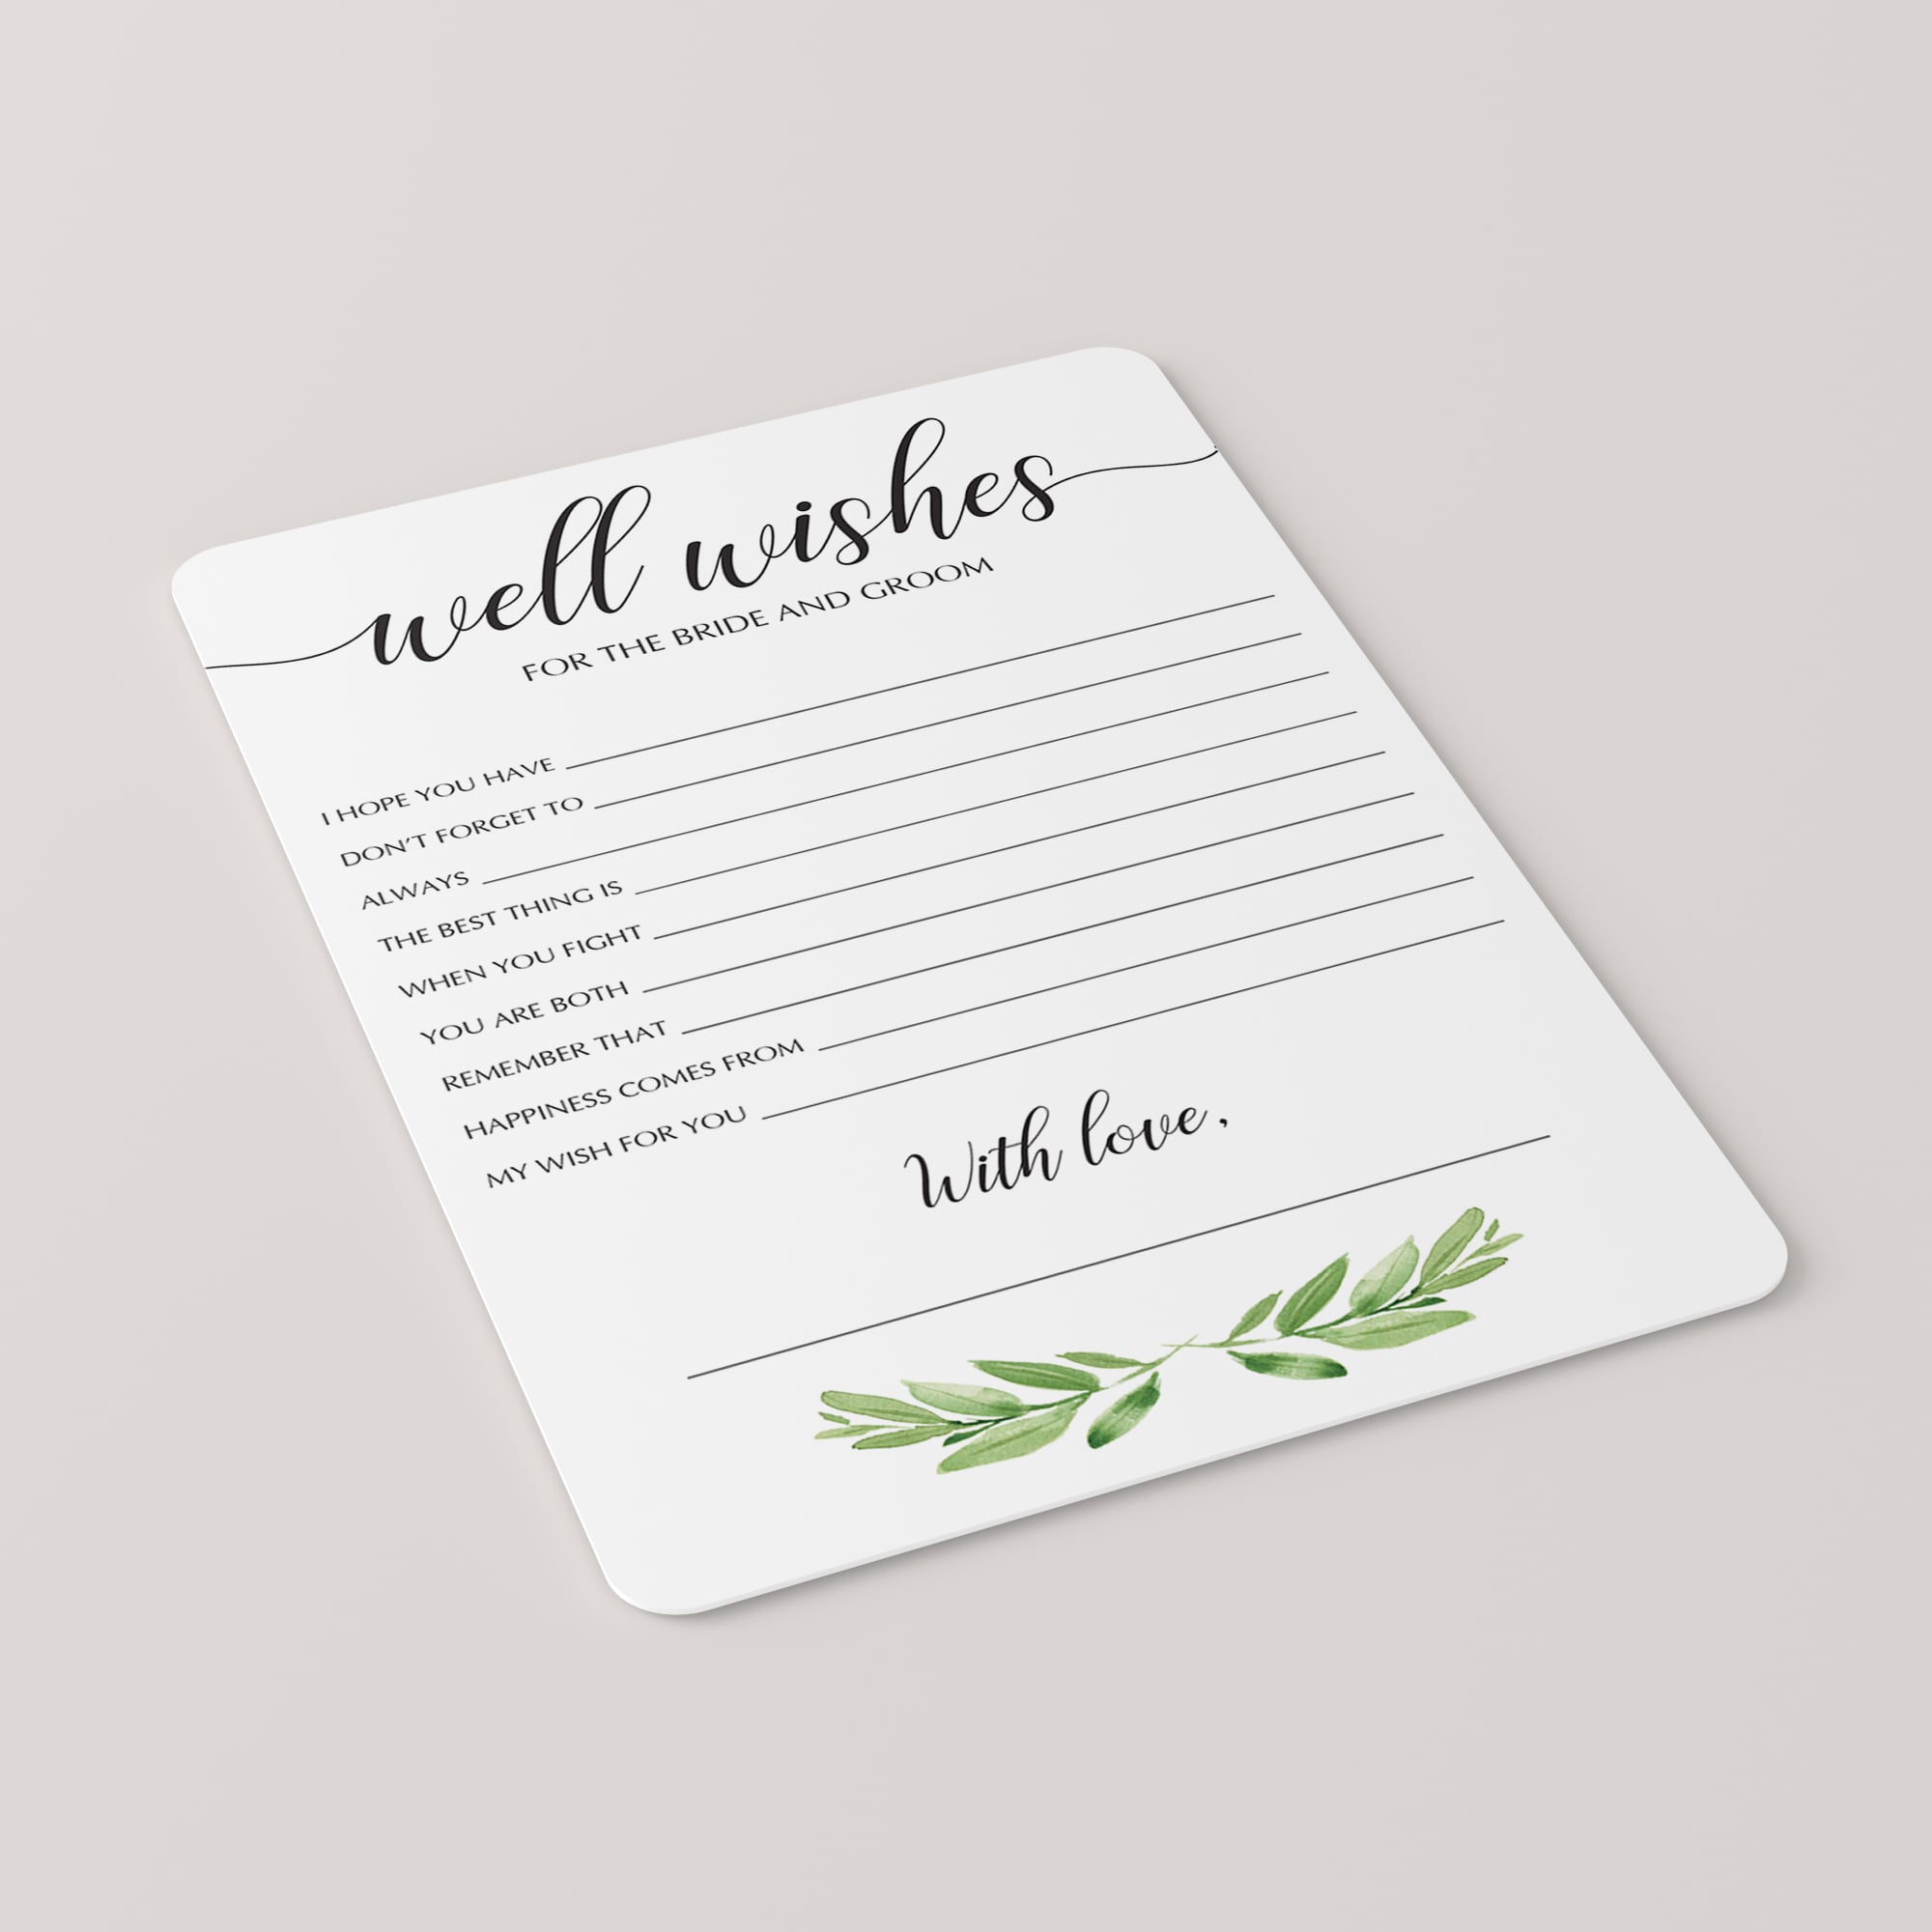 Well wishes cards wedding by LittleSizzle